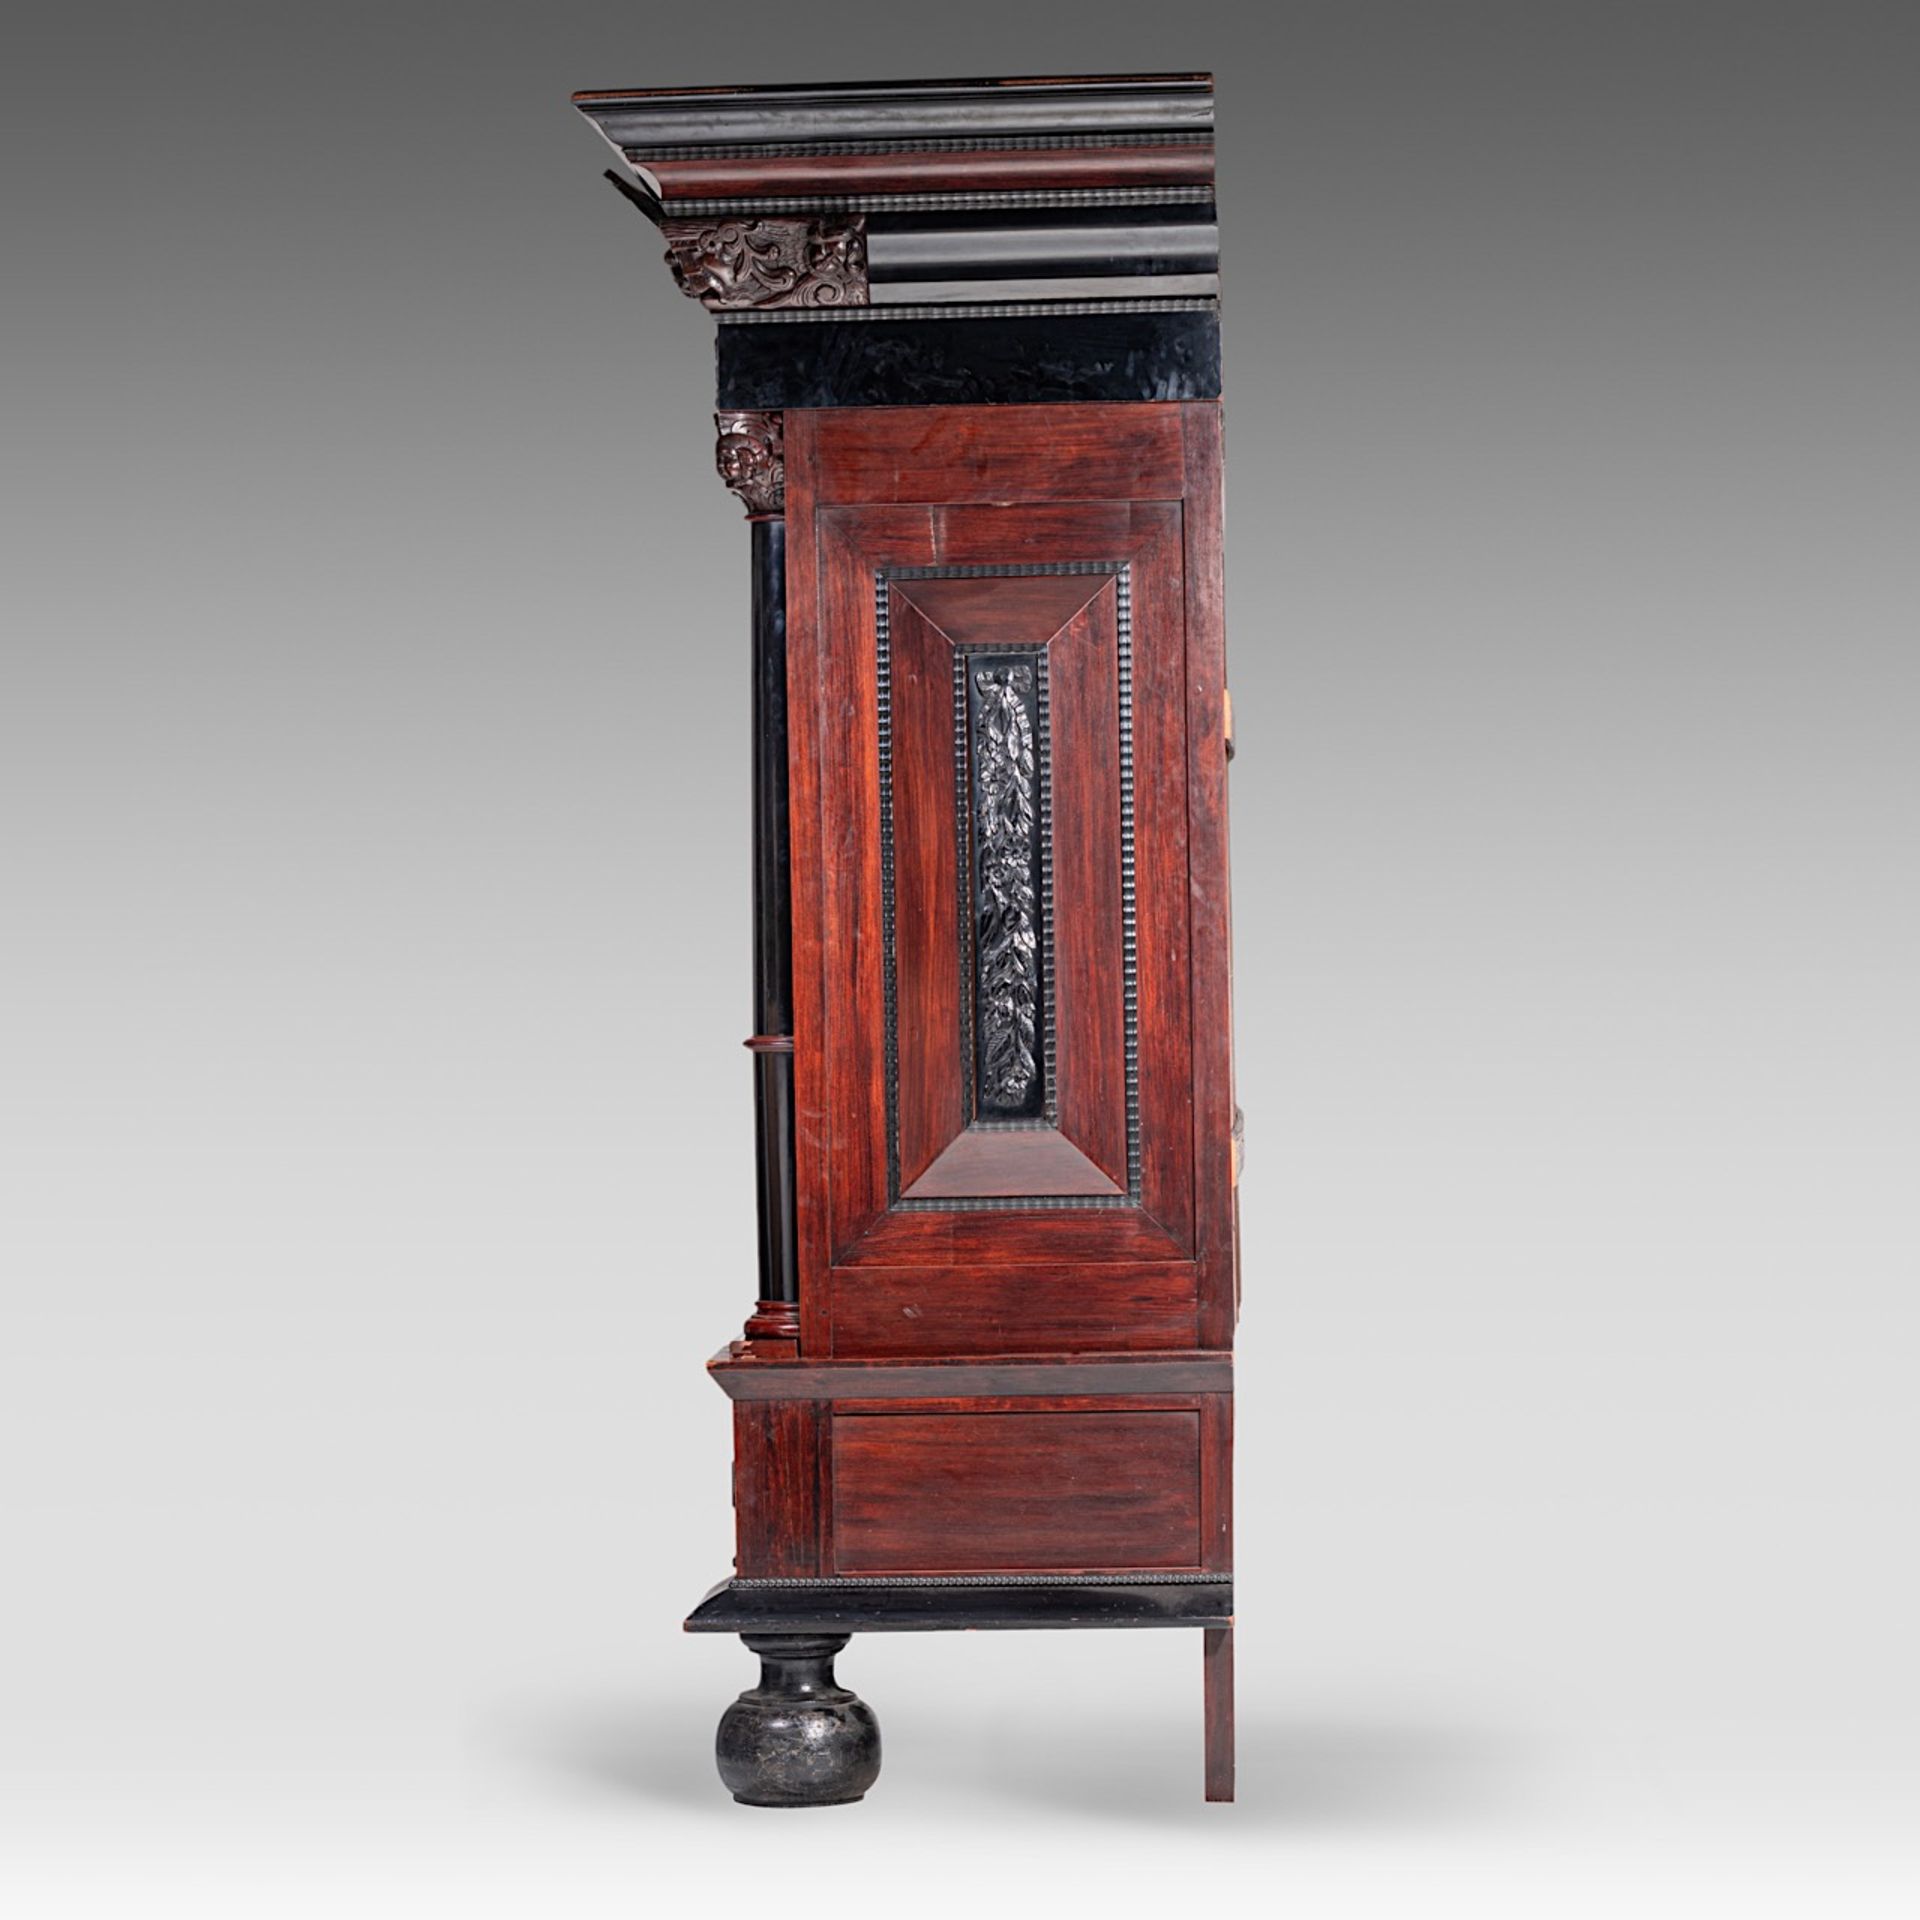 A large Baroque style rosewood and ebony cupboard, H 235 - W 200 - D 85 cm - Image 3 of 6